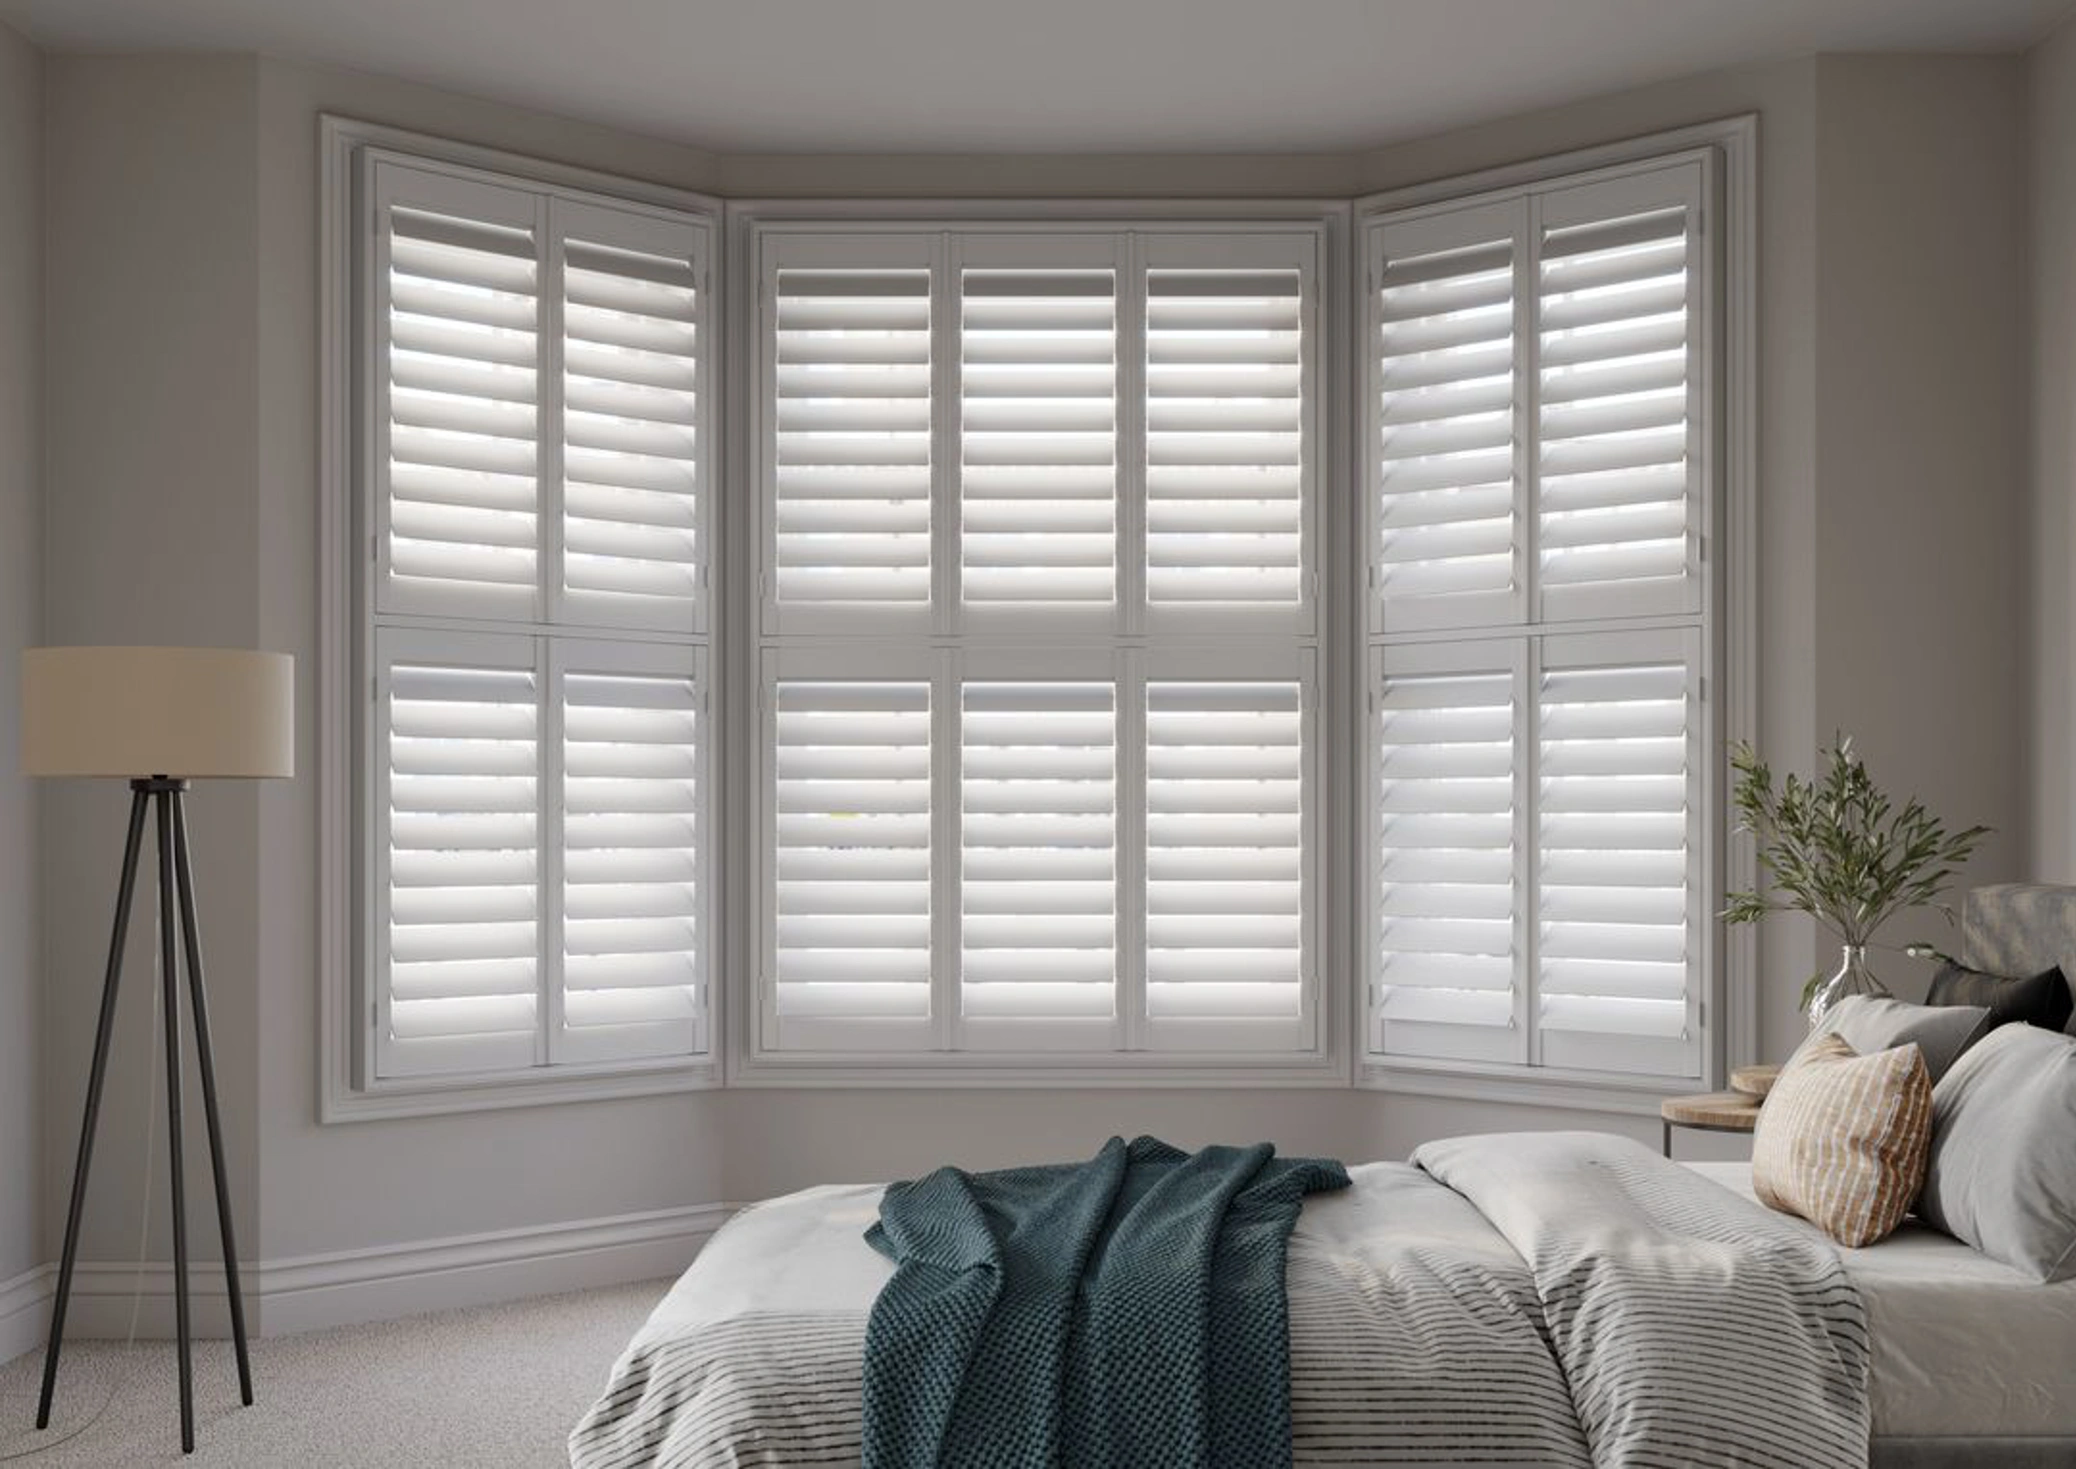 Vivid White angled bay with wooden shutters in a neutral bedroom